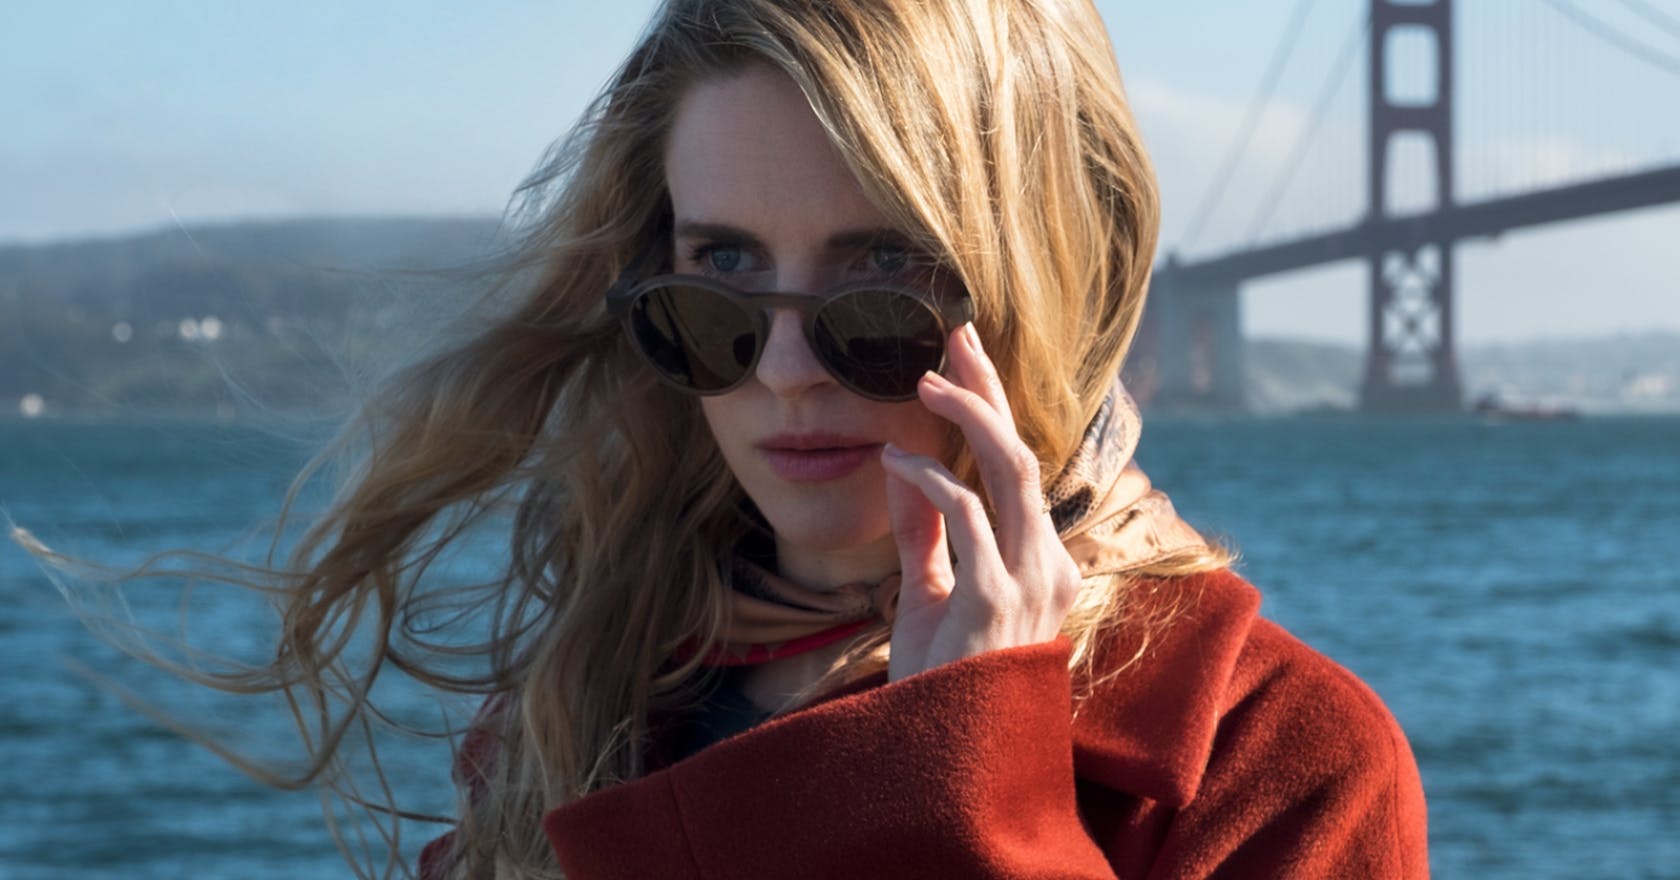 Brit Marling - Pictures, Videos, Bio, and More